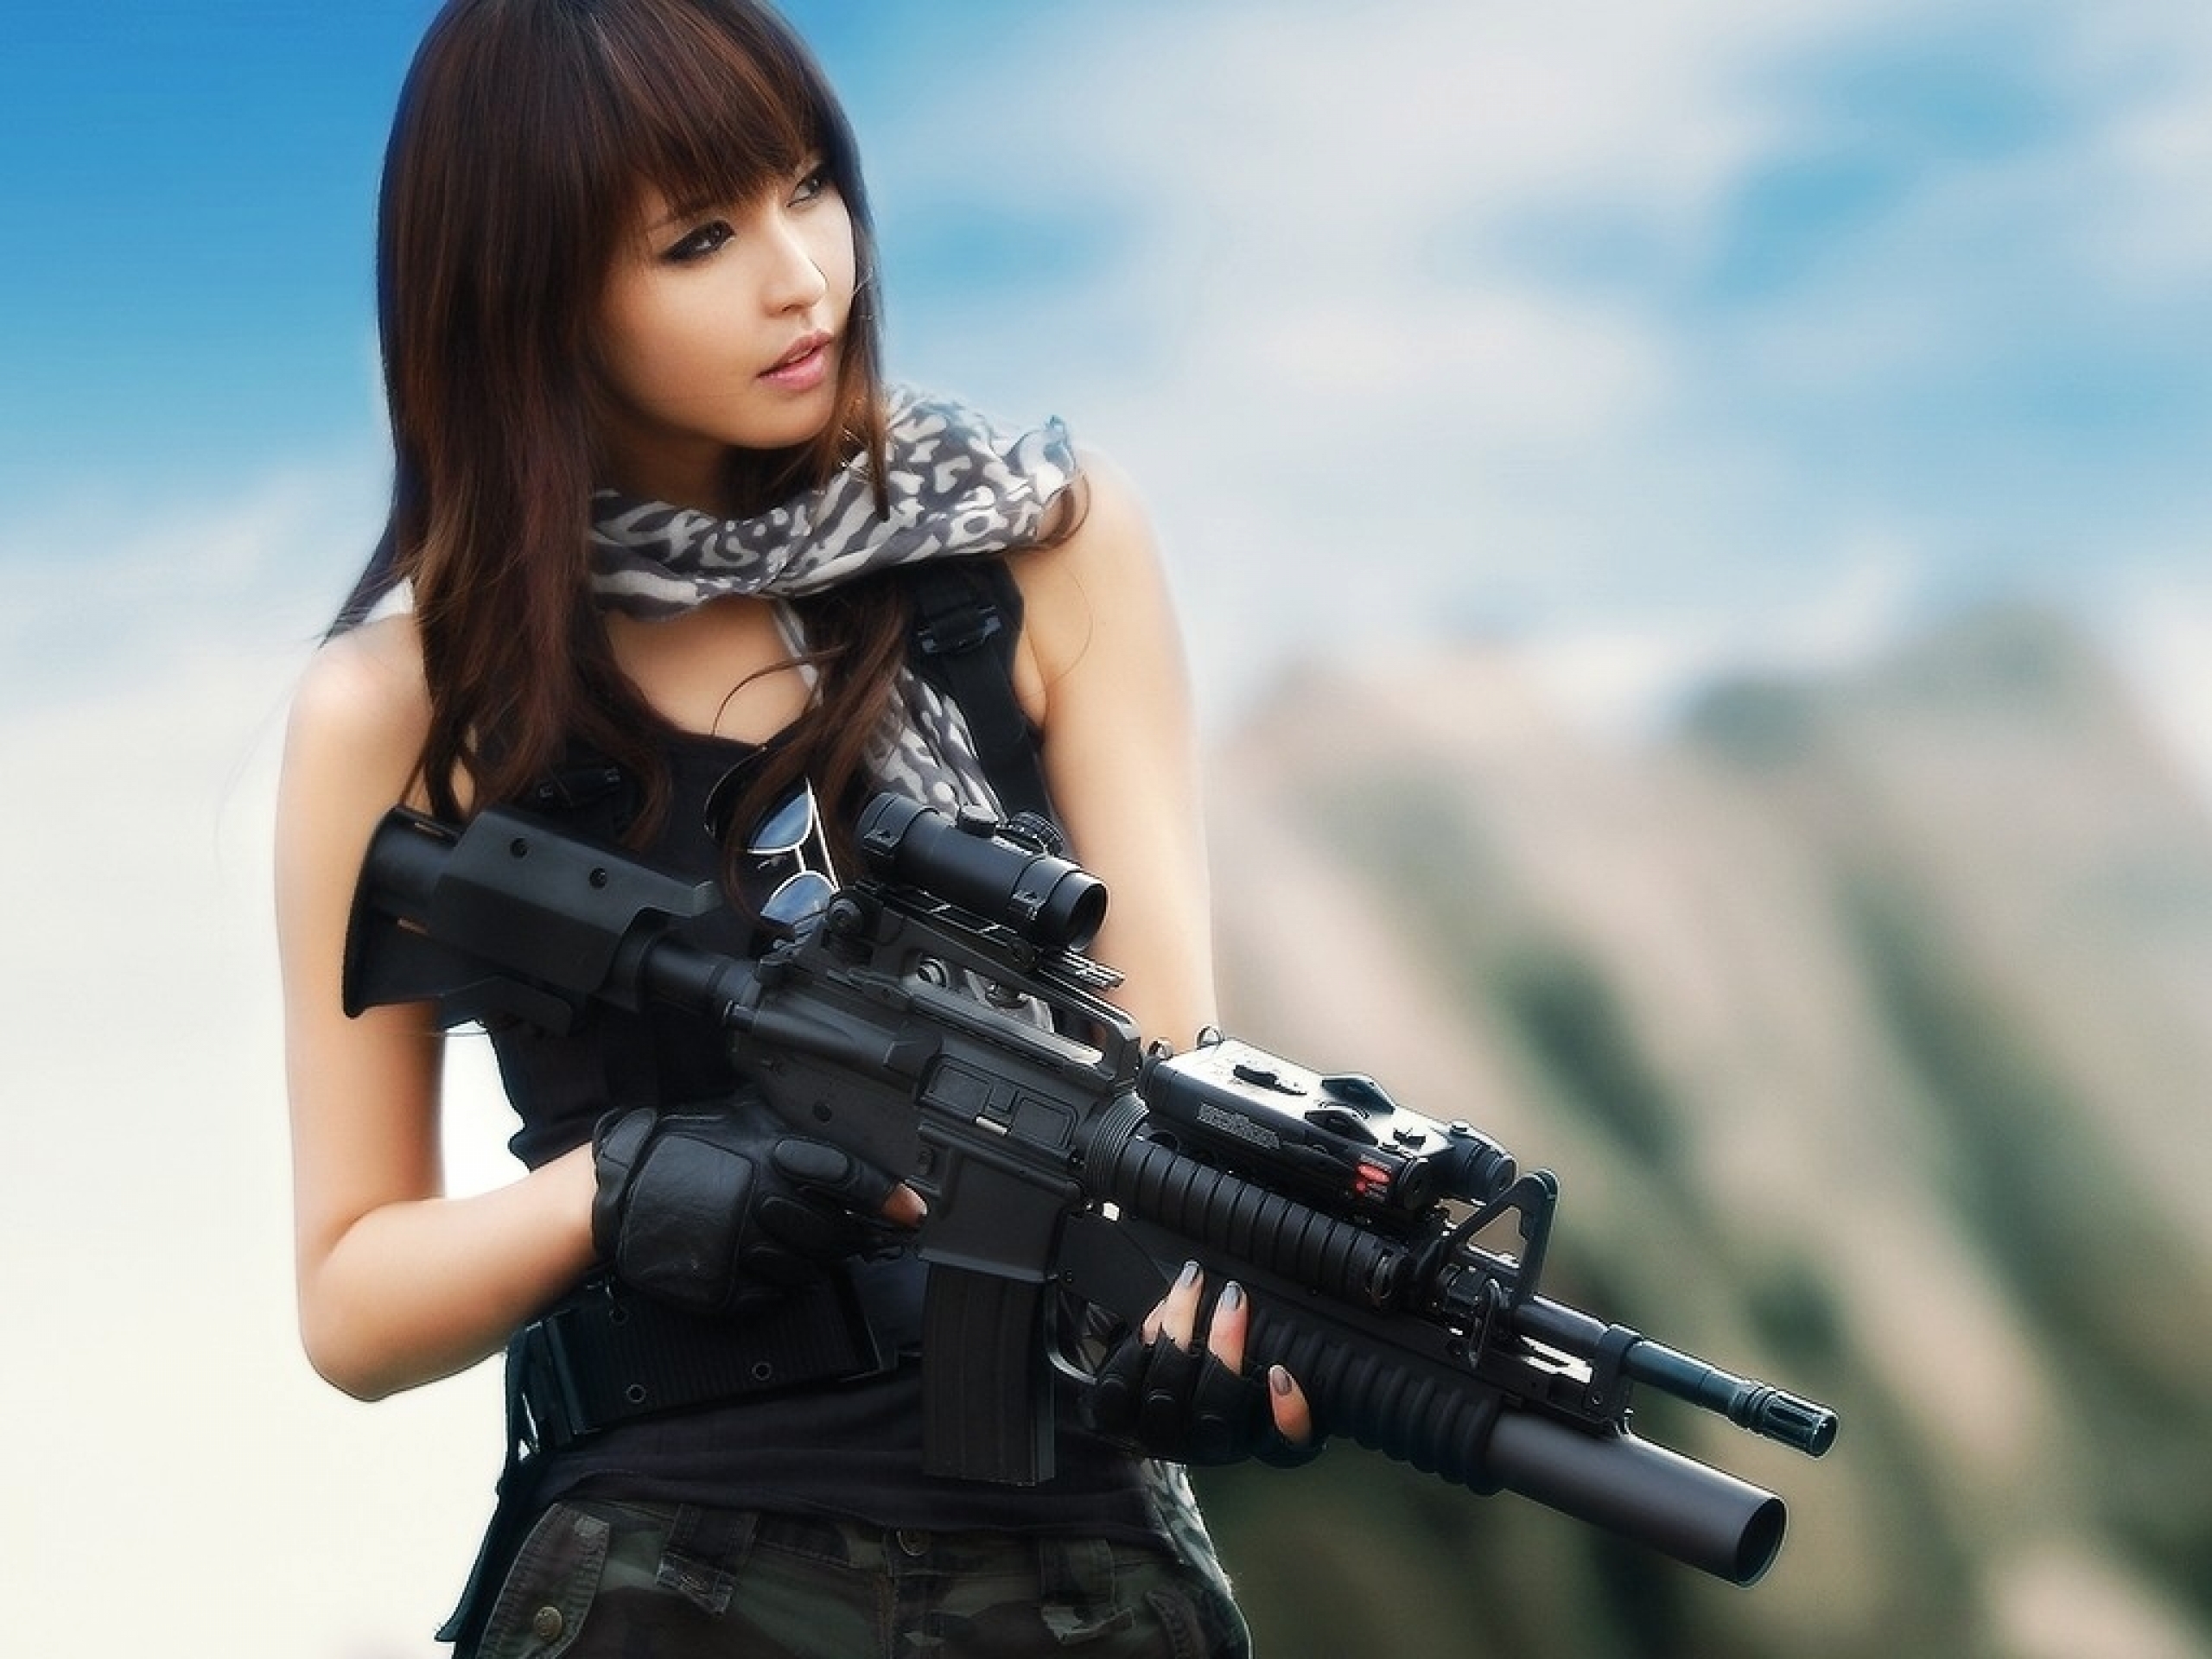 40 Airsoft wallpapers HD  Download Free backgrounds